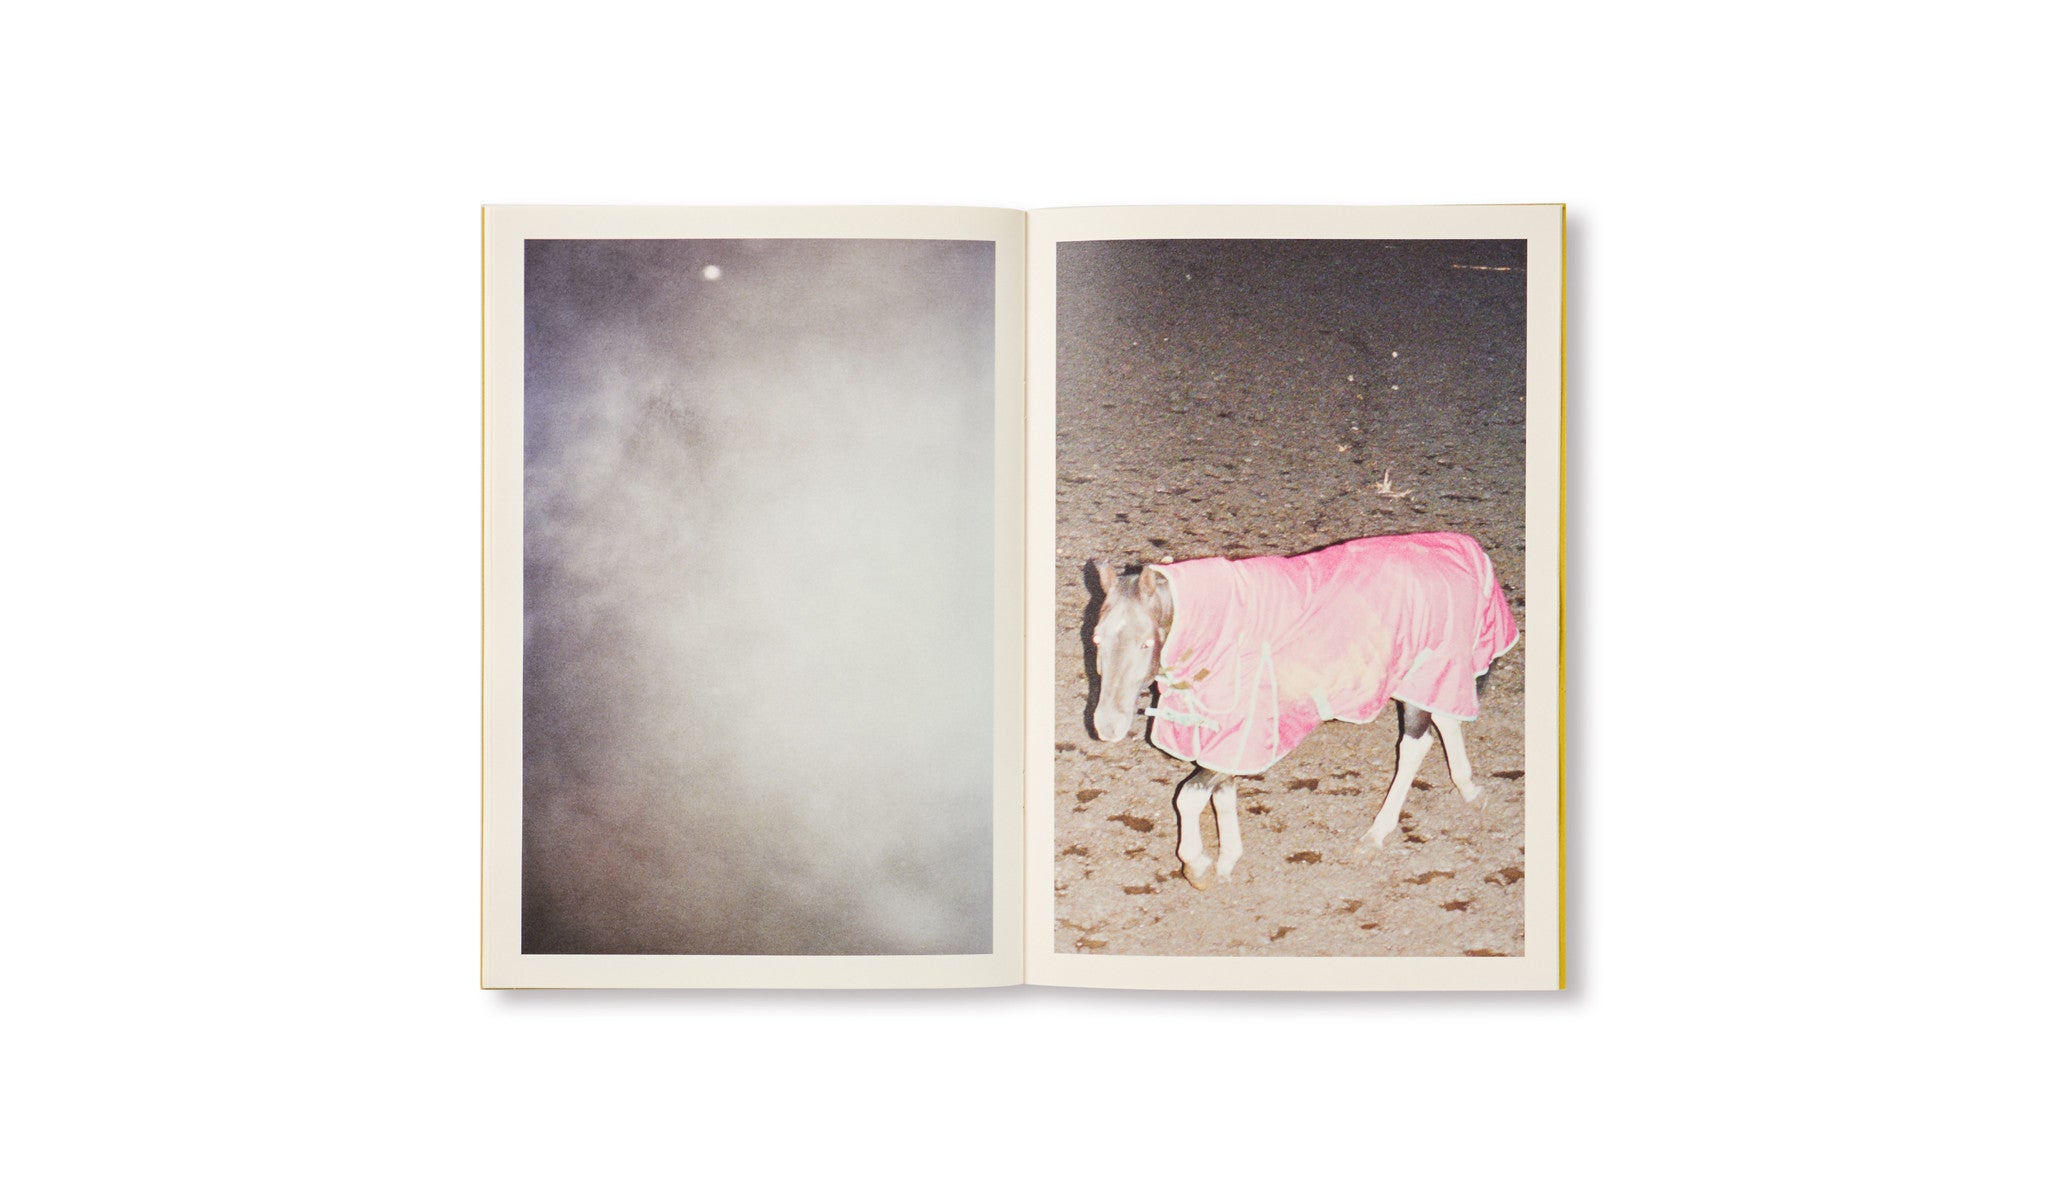 DISTANCE (PICTURES FOR AN UNTOLD STORY) by Ola Rindal [SIGNED]